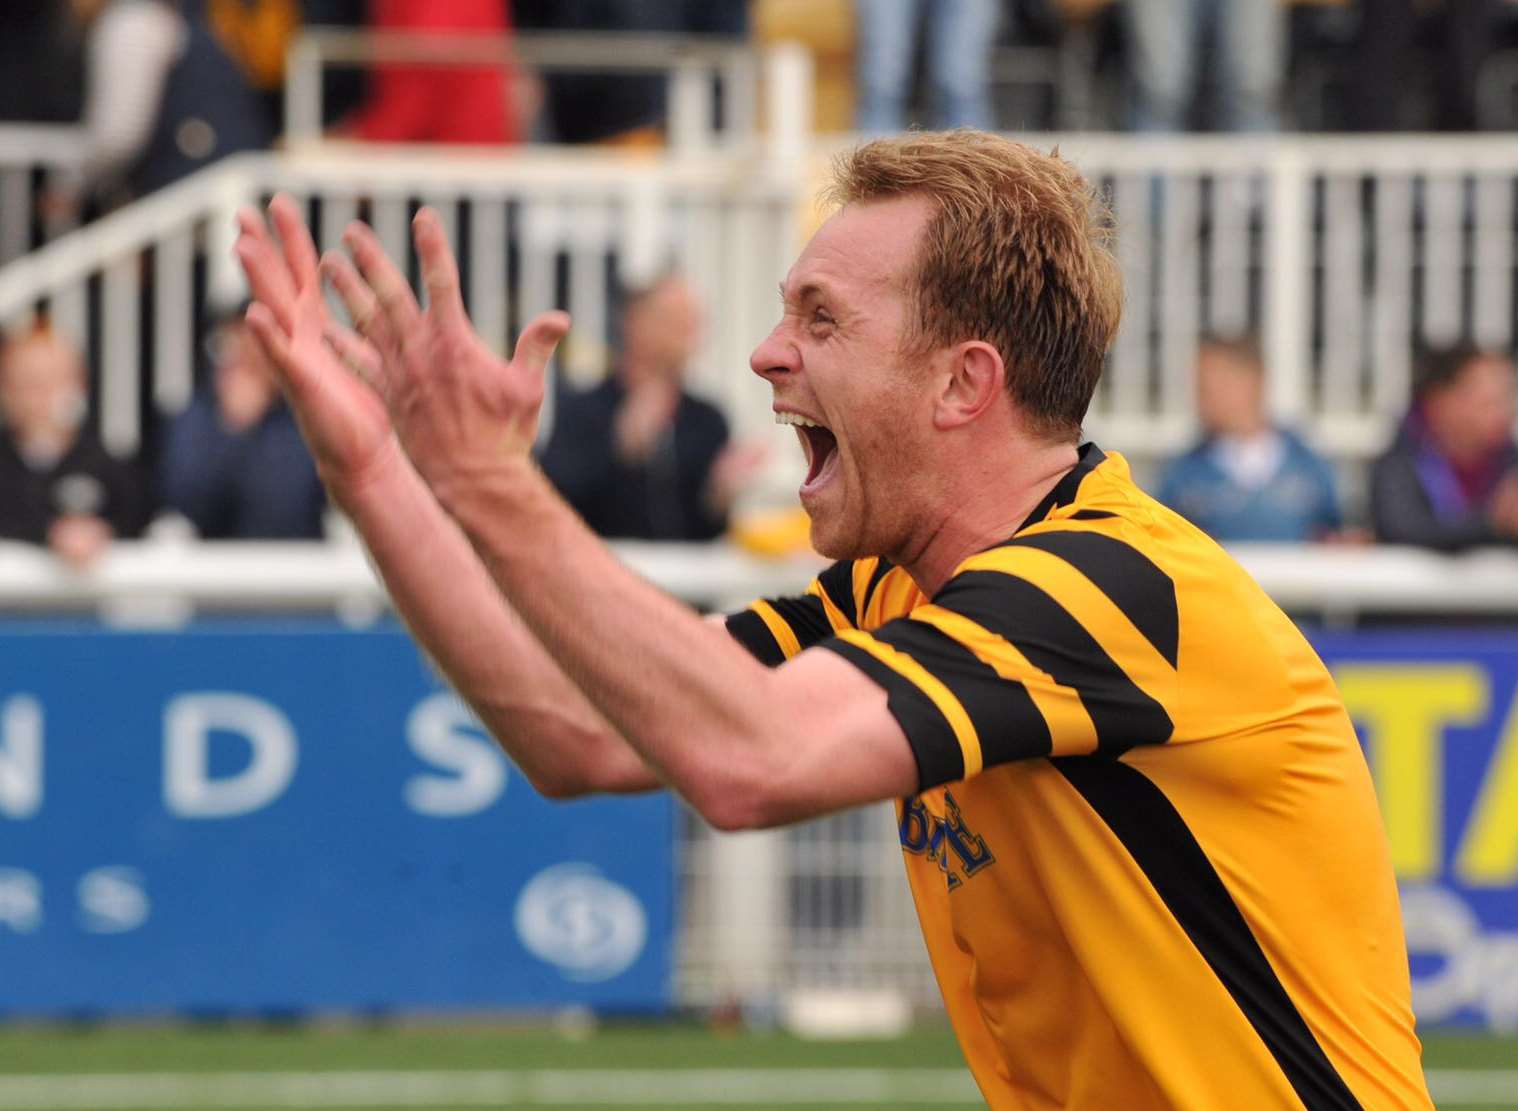 Stuart Lewis hit it off with Maidstone fans Picture: Steve Terrell